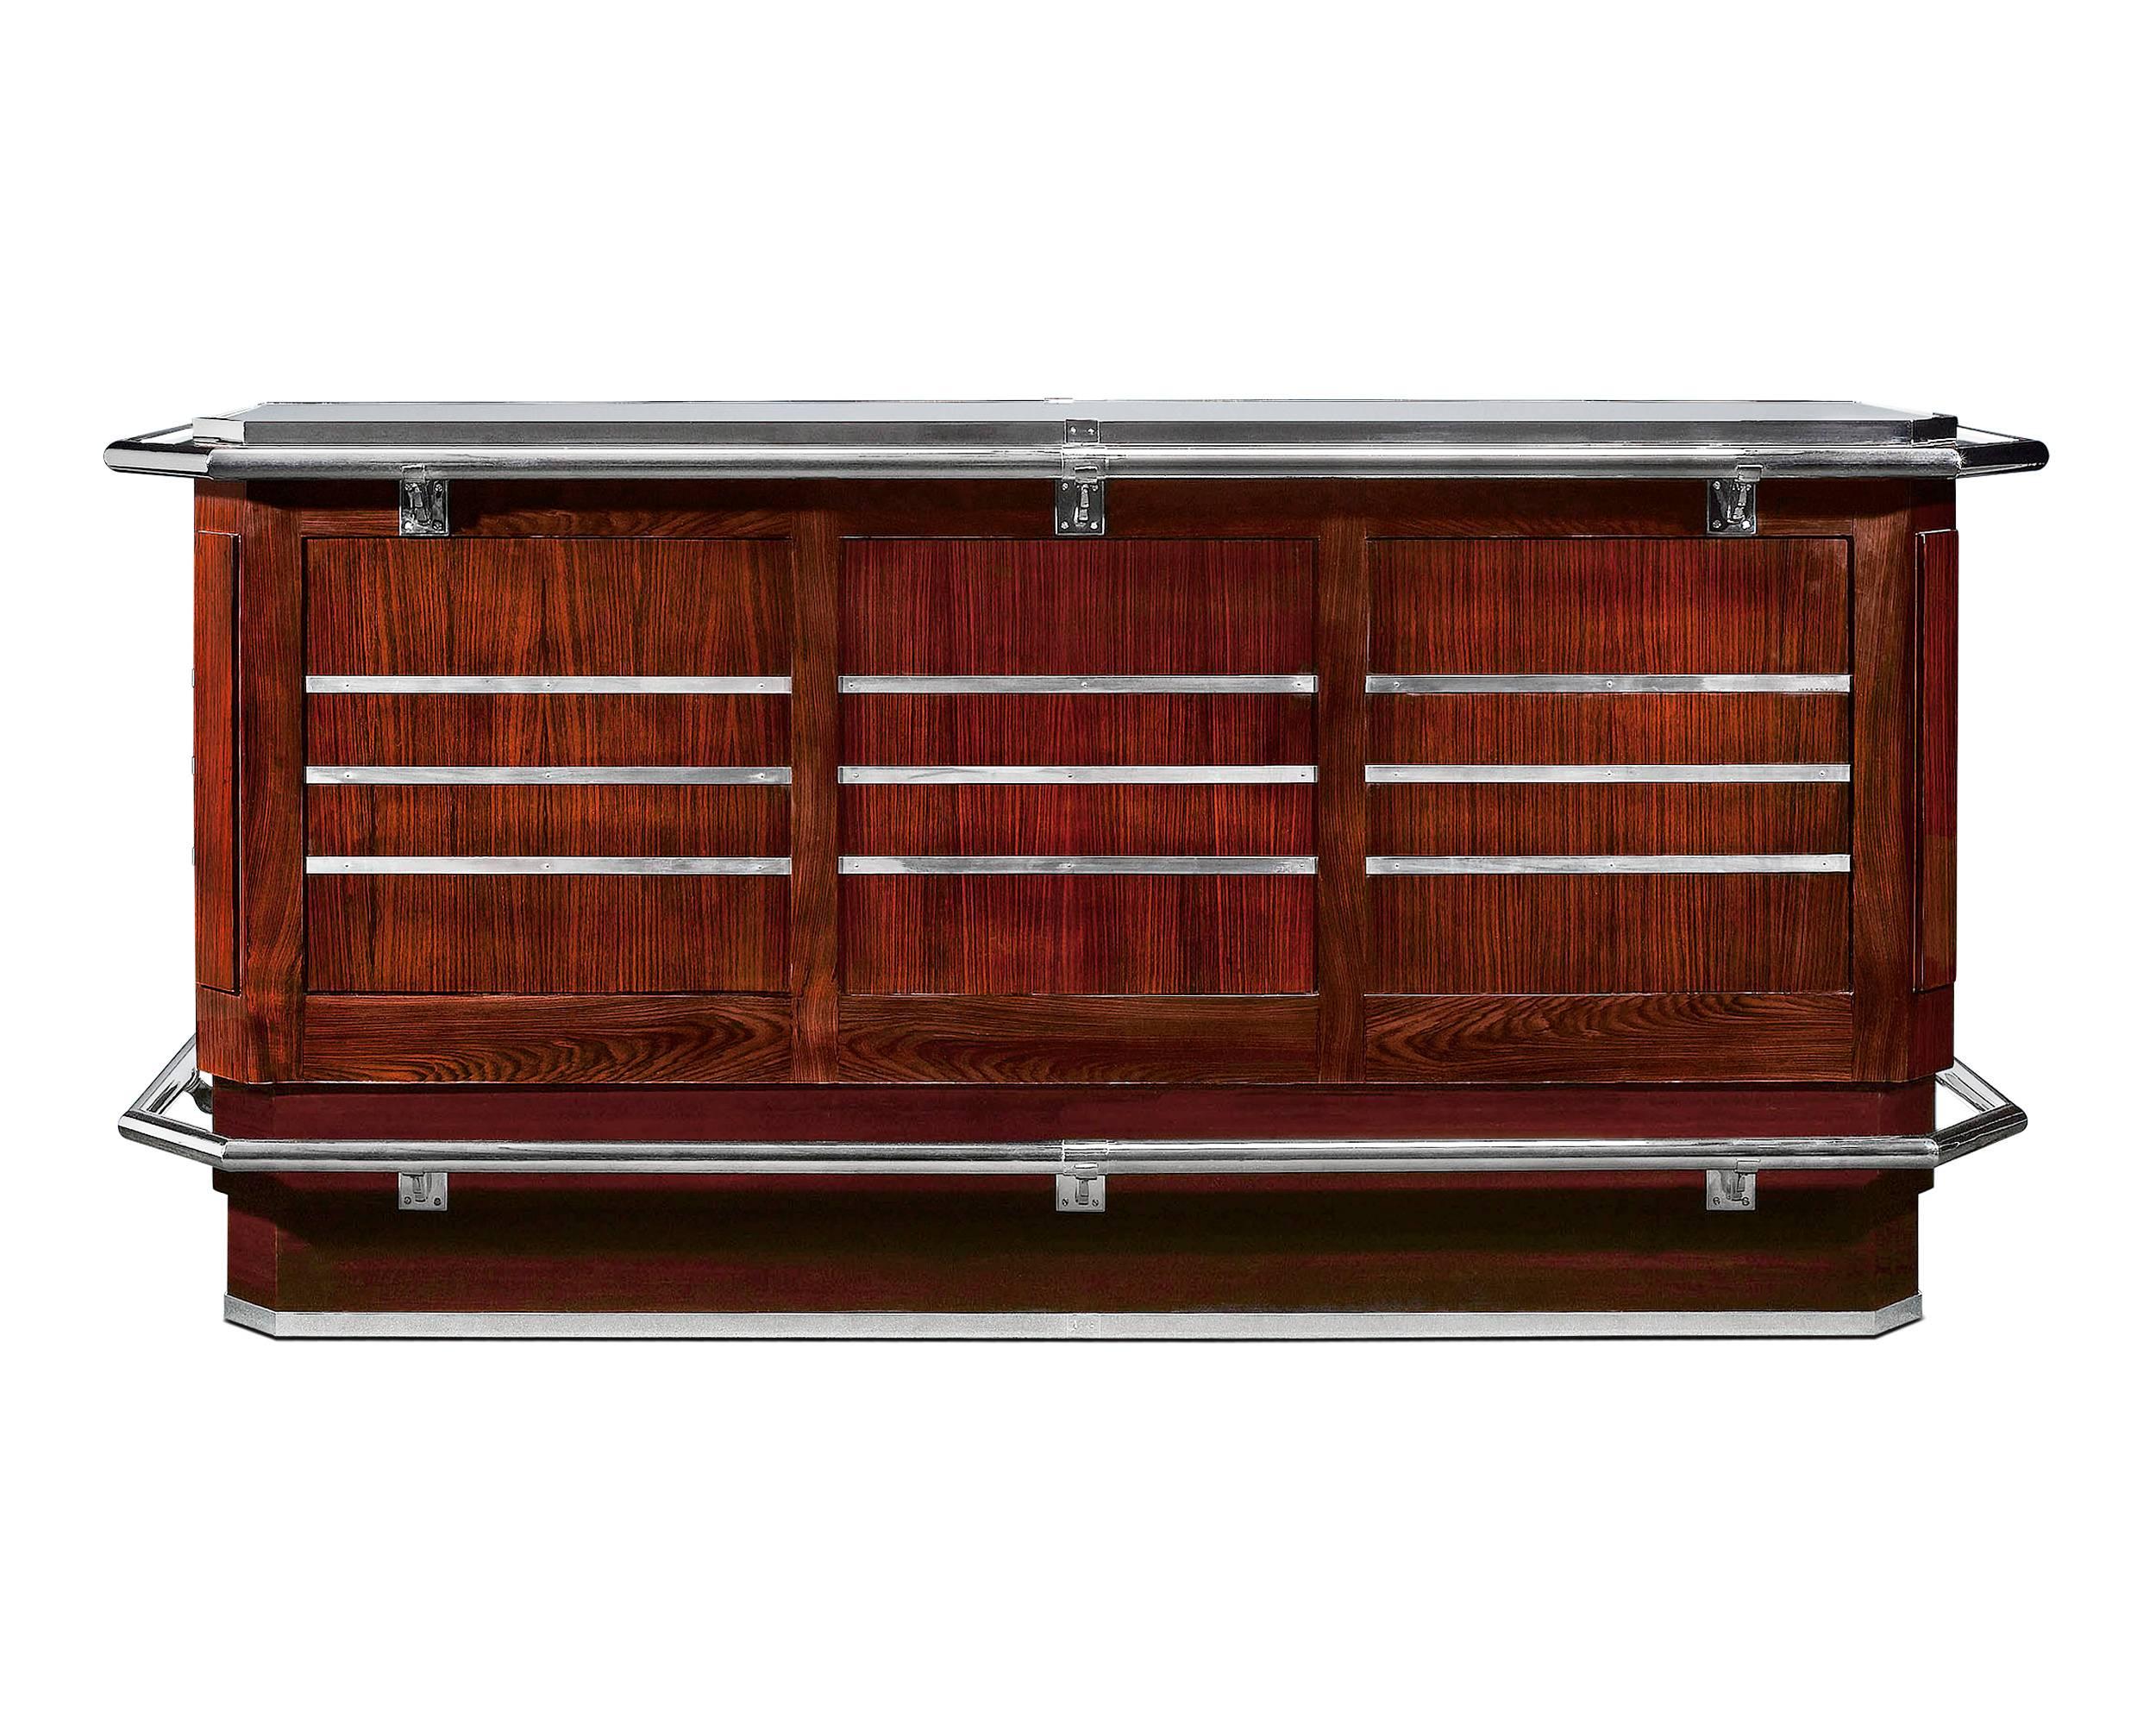 The elegance of the Art Deco era is epitomized in this stunning bar. At almost eight feet long, this remarkable bar displays exceptional proportion. Beautifully crafted of polished mahogany mounted with polished chrome accents, including hand and